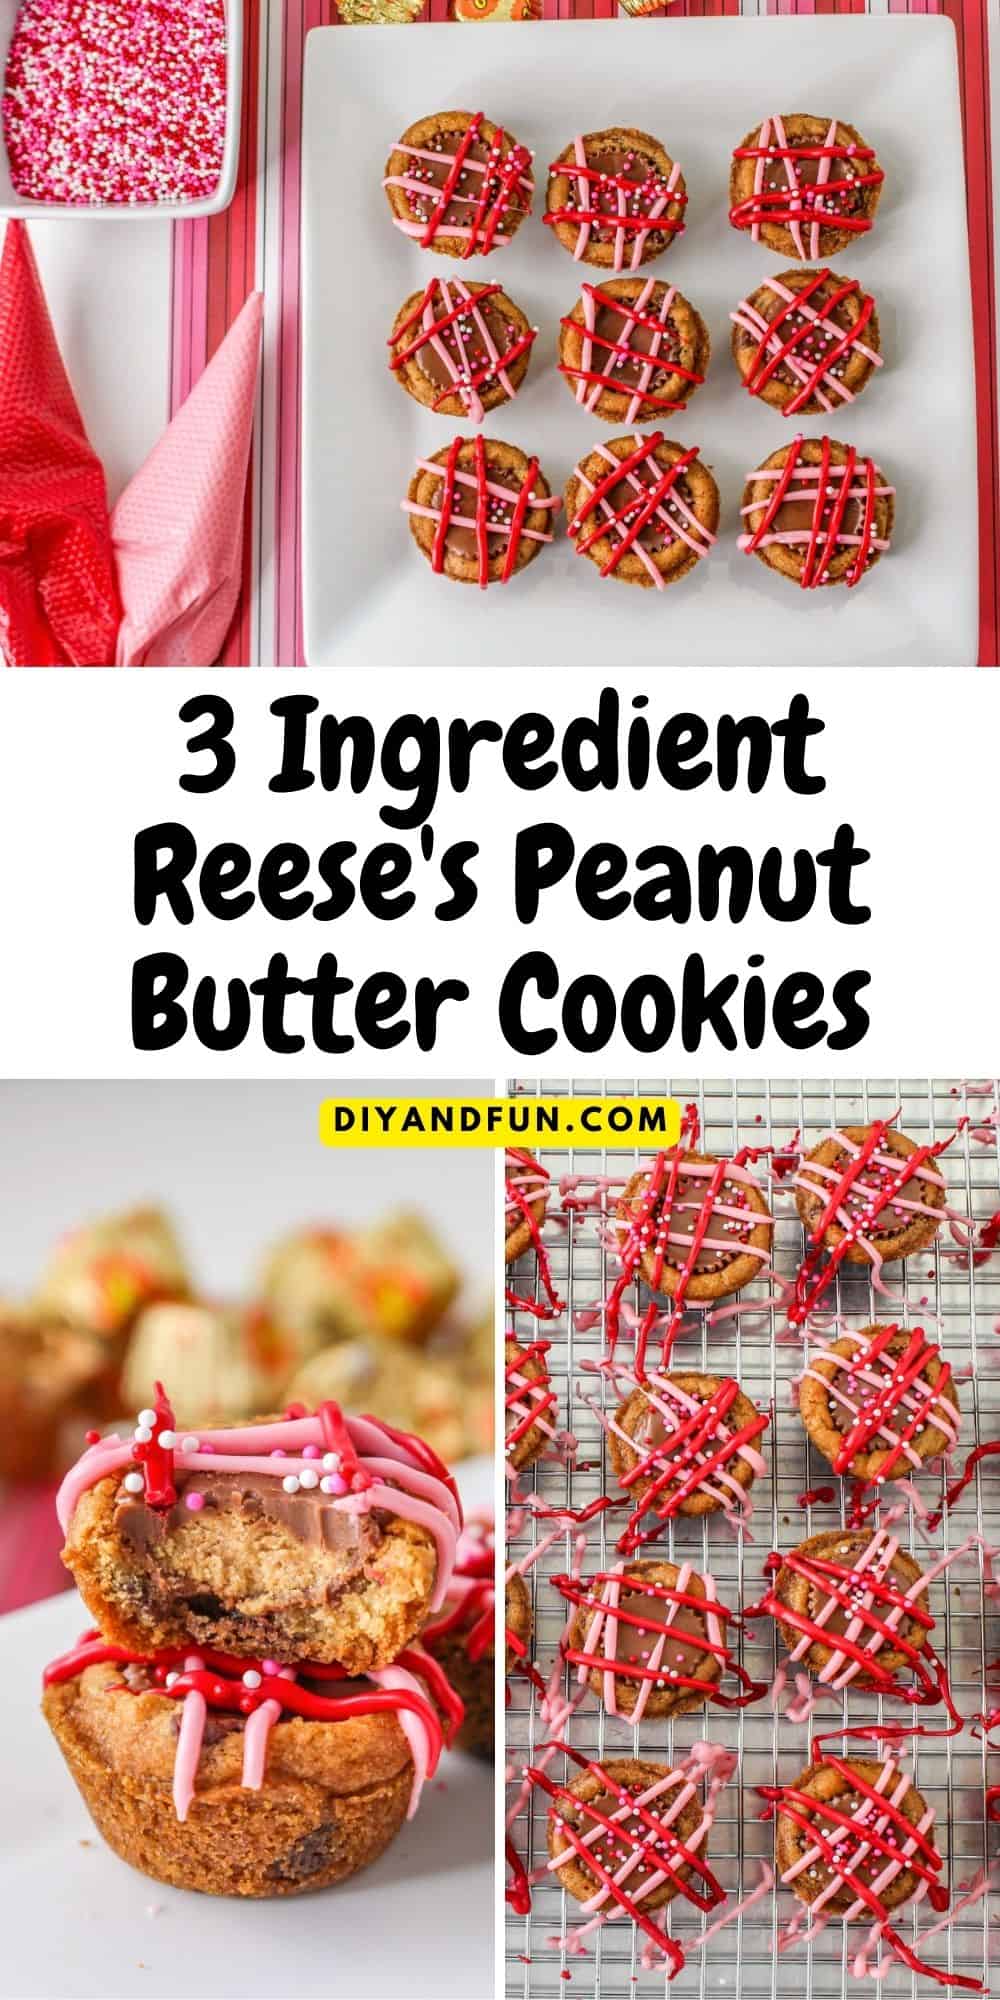 3 Ingredient Reese's Peanut Butter Cookies, a simple and delicious 15 minute dessert or snack recipe idea for making a yummy cookie.